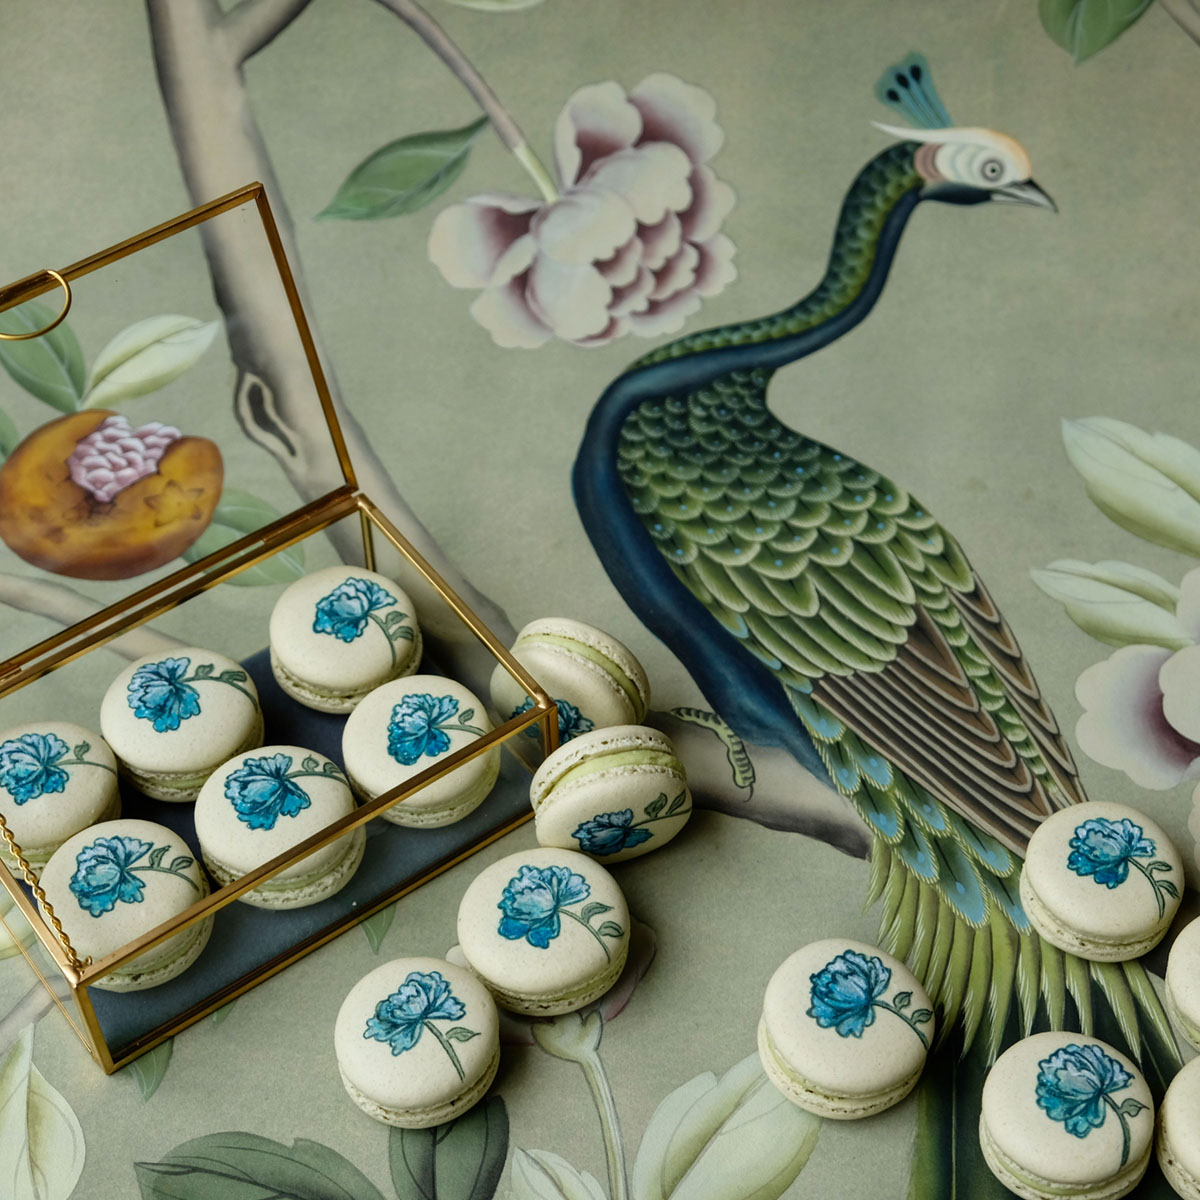 Macarons featuring a blue-and-white floral design are displayed in a glass box on a fabric pattern featuring birds and botanical elements